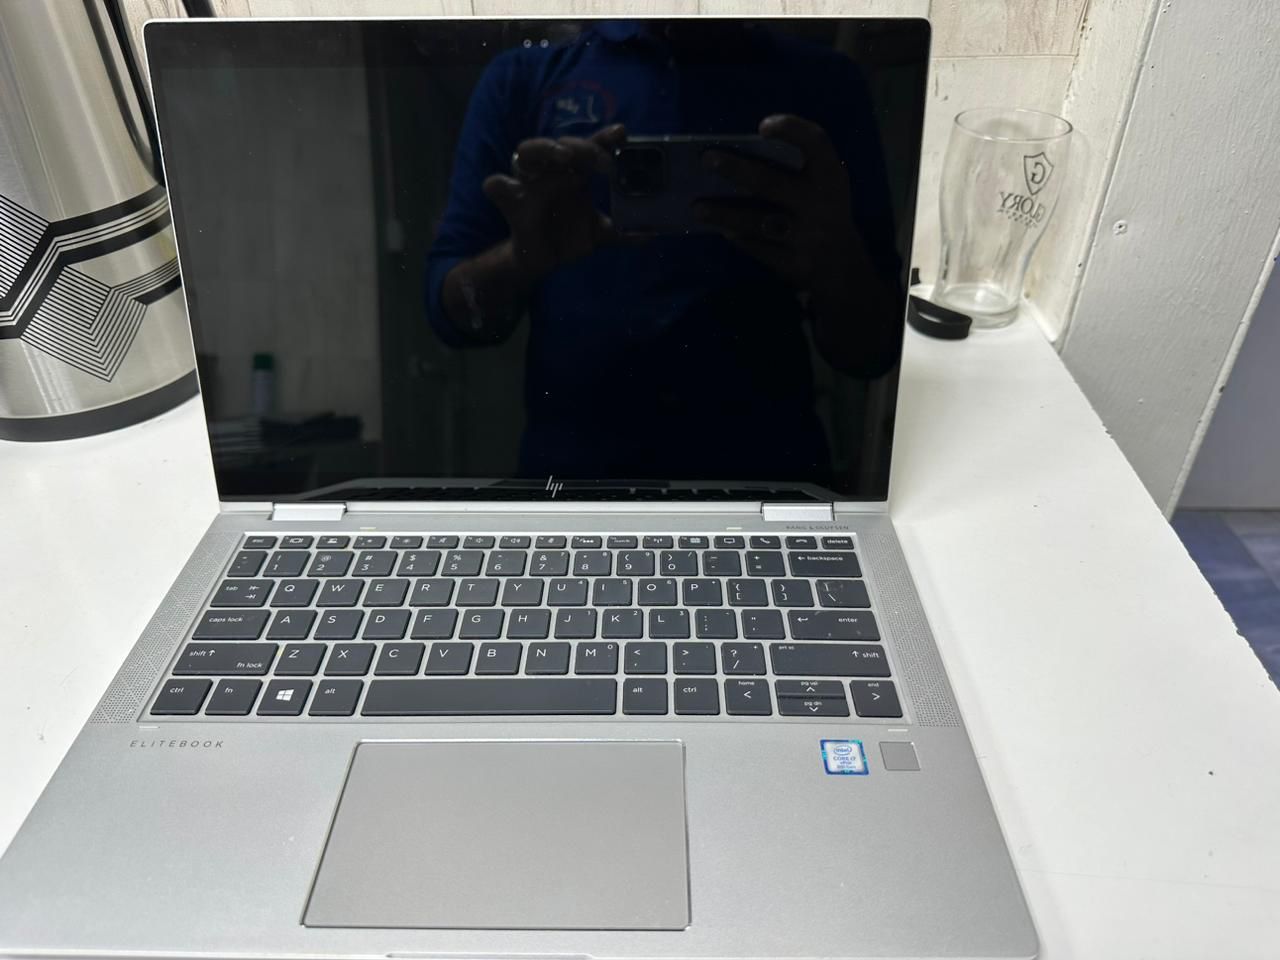  Hp Elitebook 1040 G5 (8Th Generation) X360 Convertible Intel Core I7 Ram 16Gb Storage 512Ssd  Screen Size 13.3"  Touch Screen Slim And Portable 4Hrs Battery